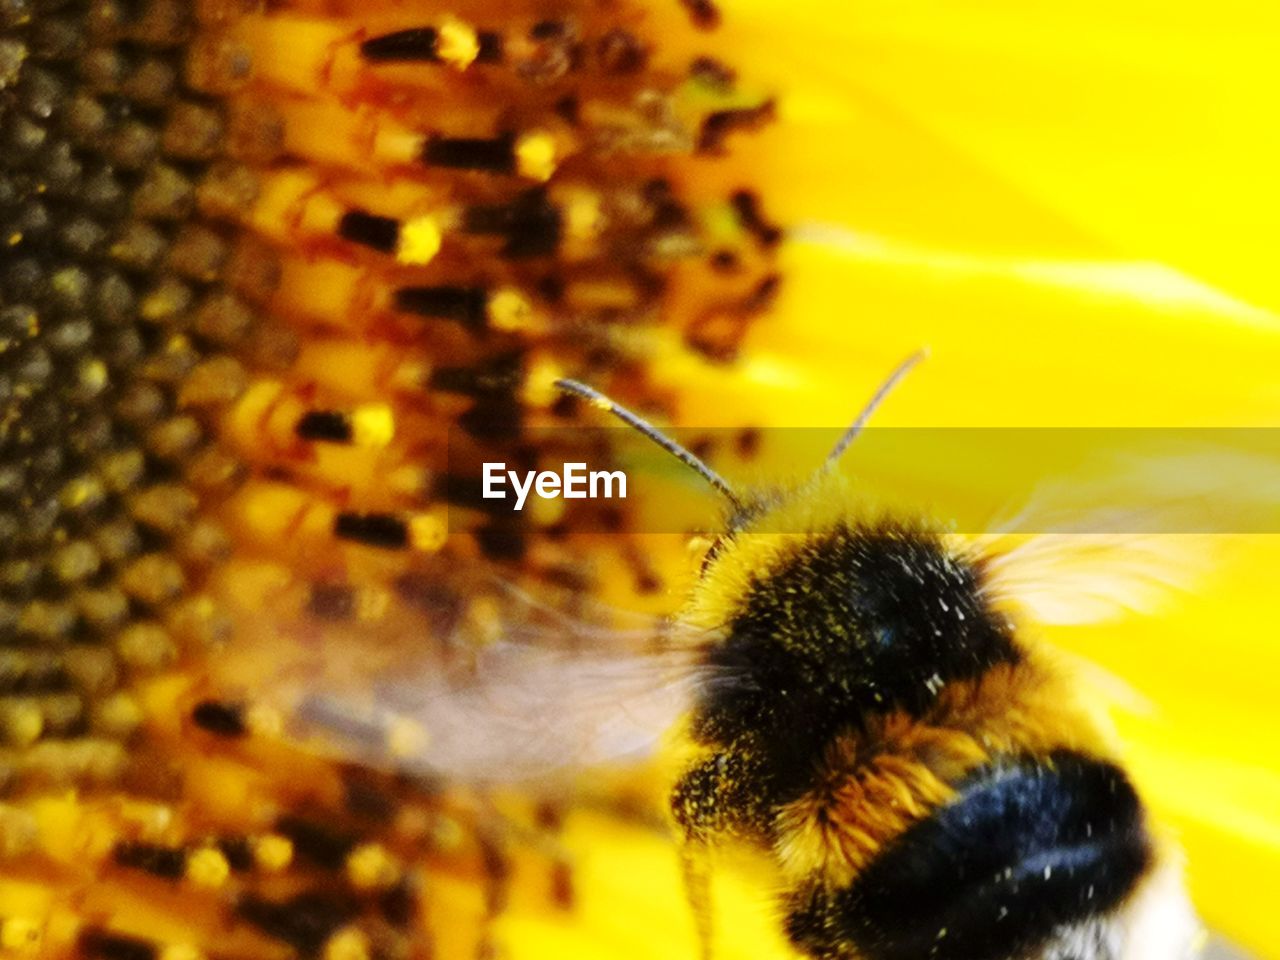 CLOSE-UP OF BEE POLLINATING ON YELLOW FLOWER